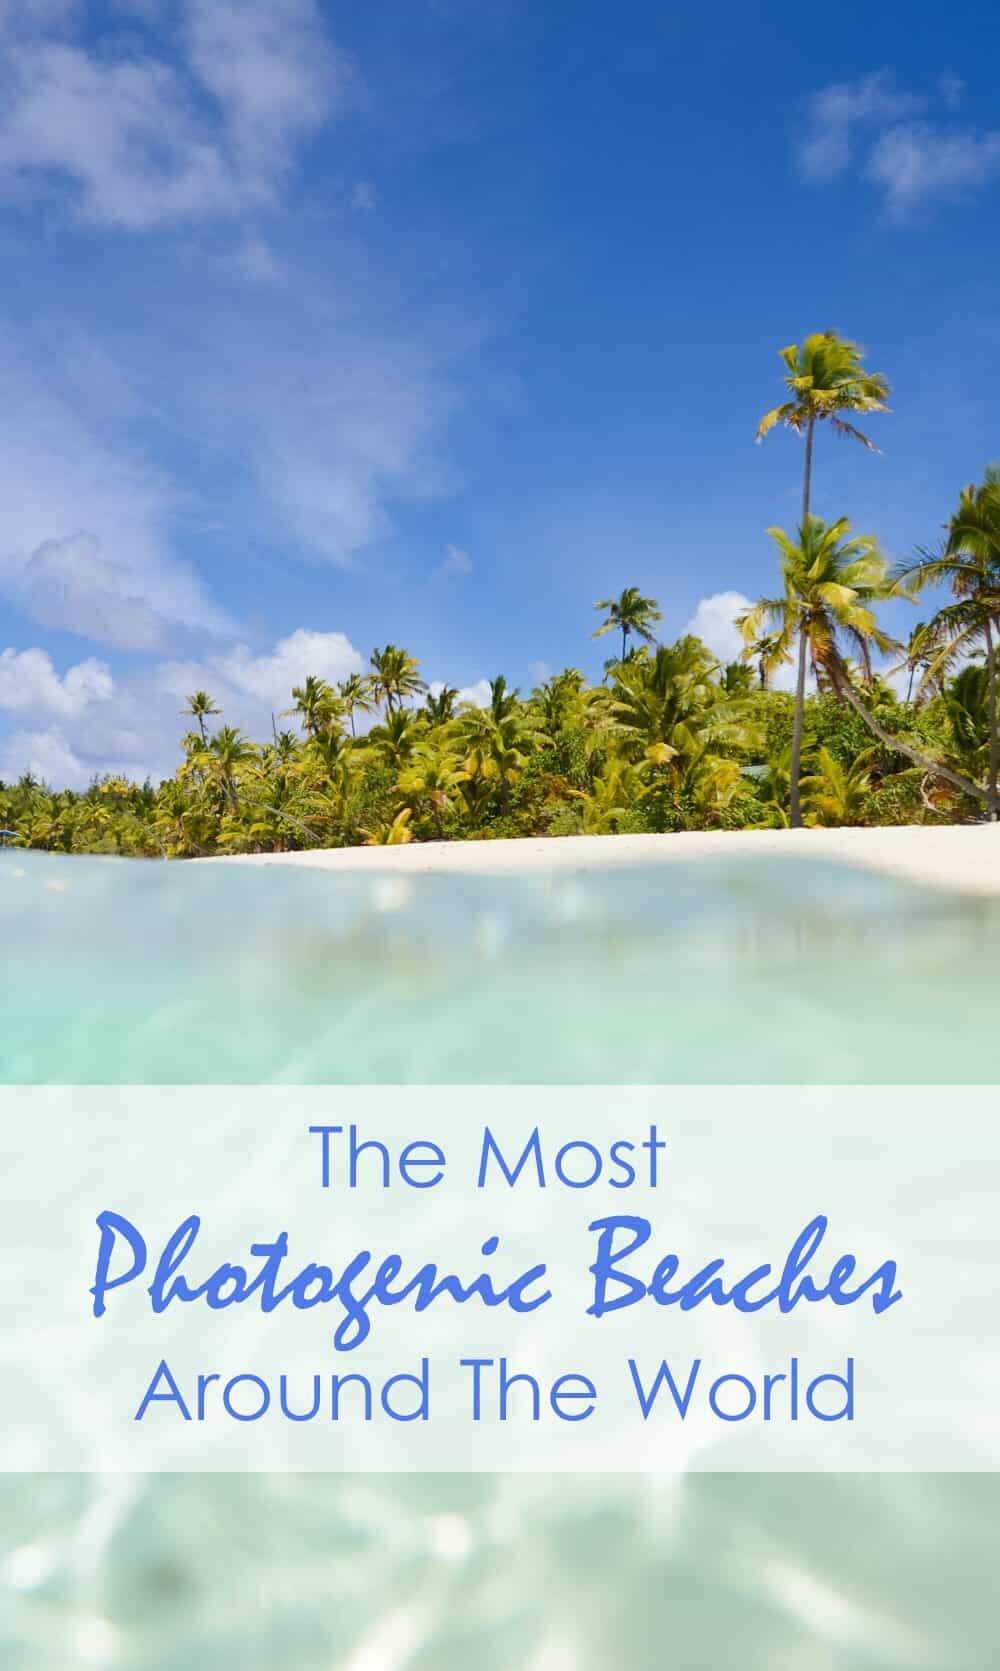 The Most Photogenic Beaches In The World by The Wandering Lens